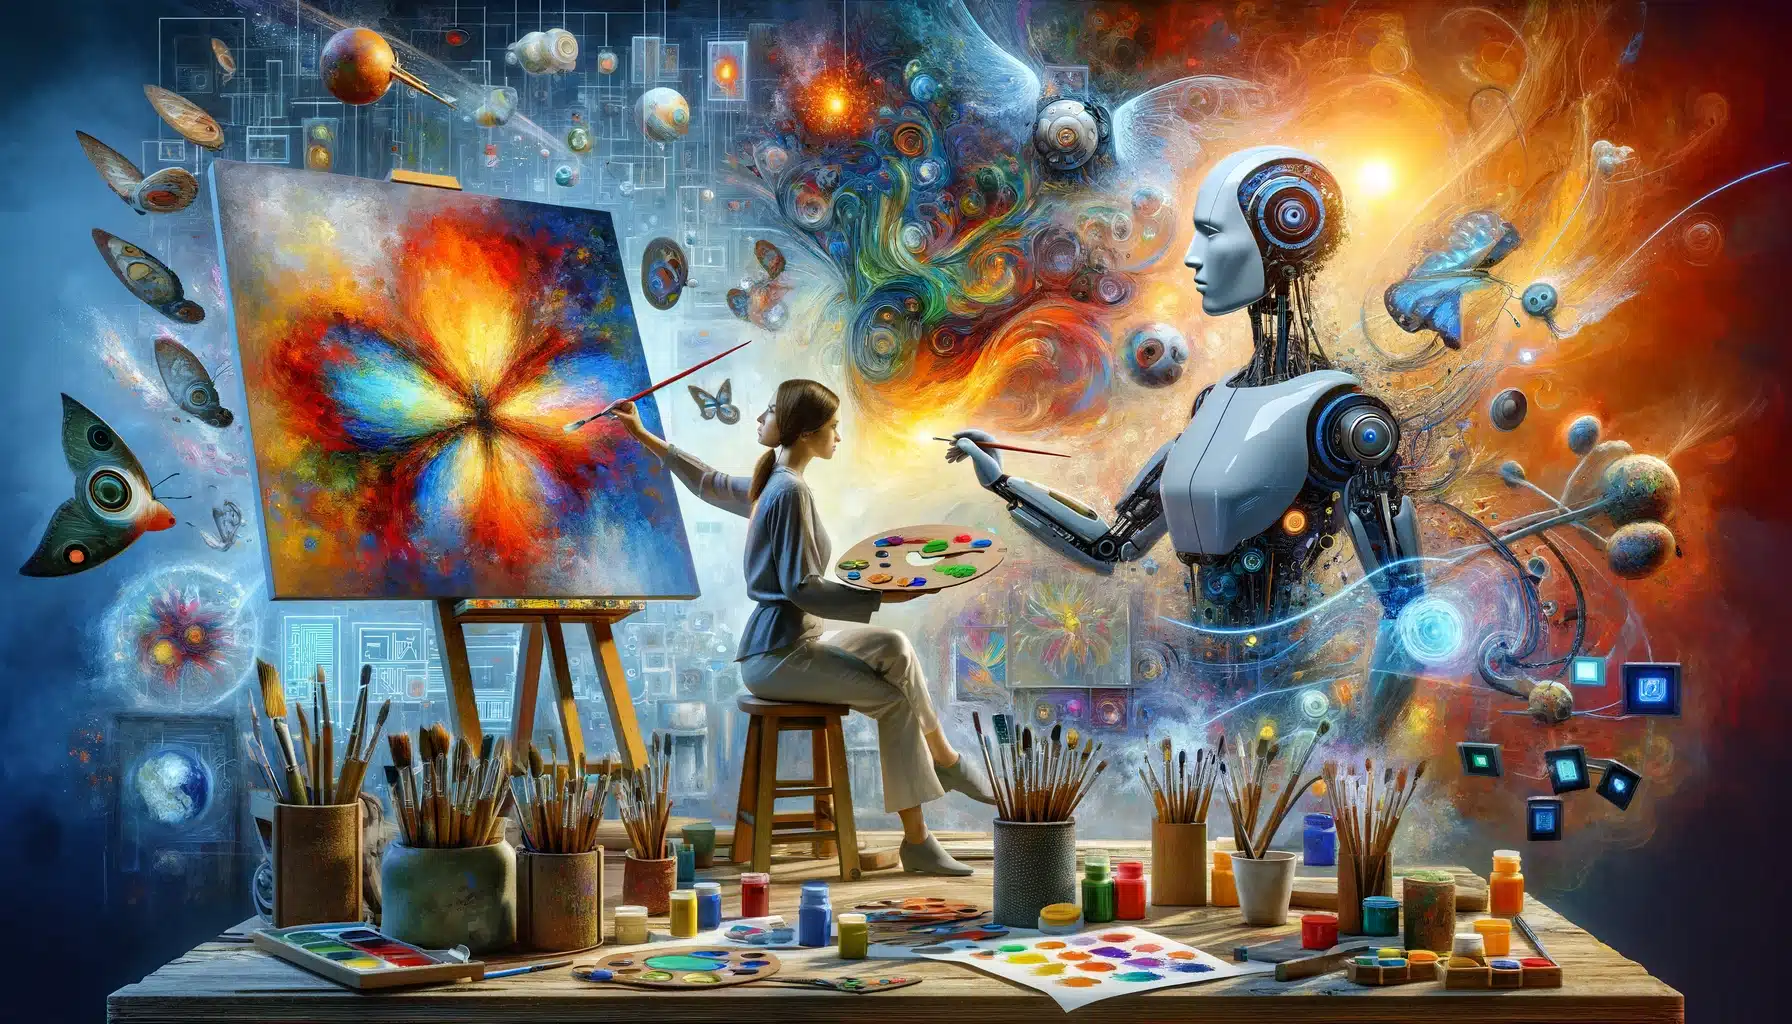 Top 5 Reasons Why AI Will Not Replace Human Artists